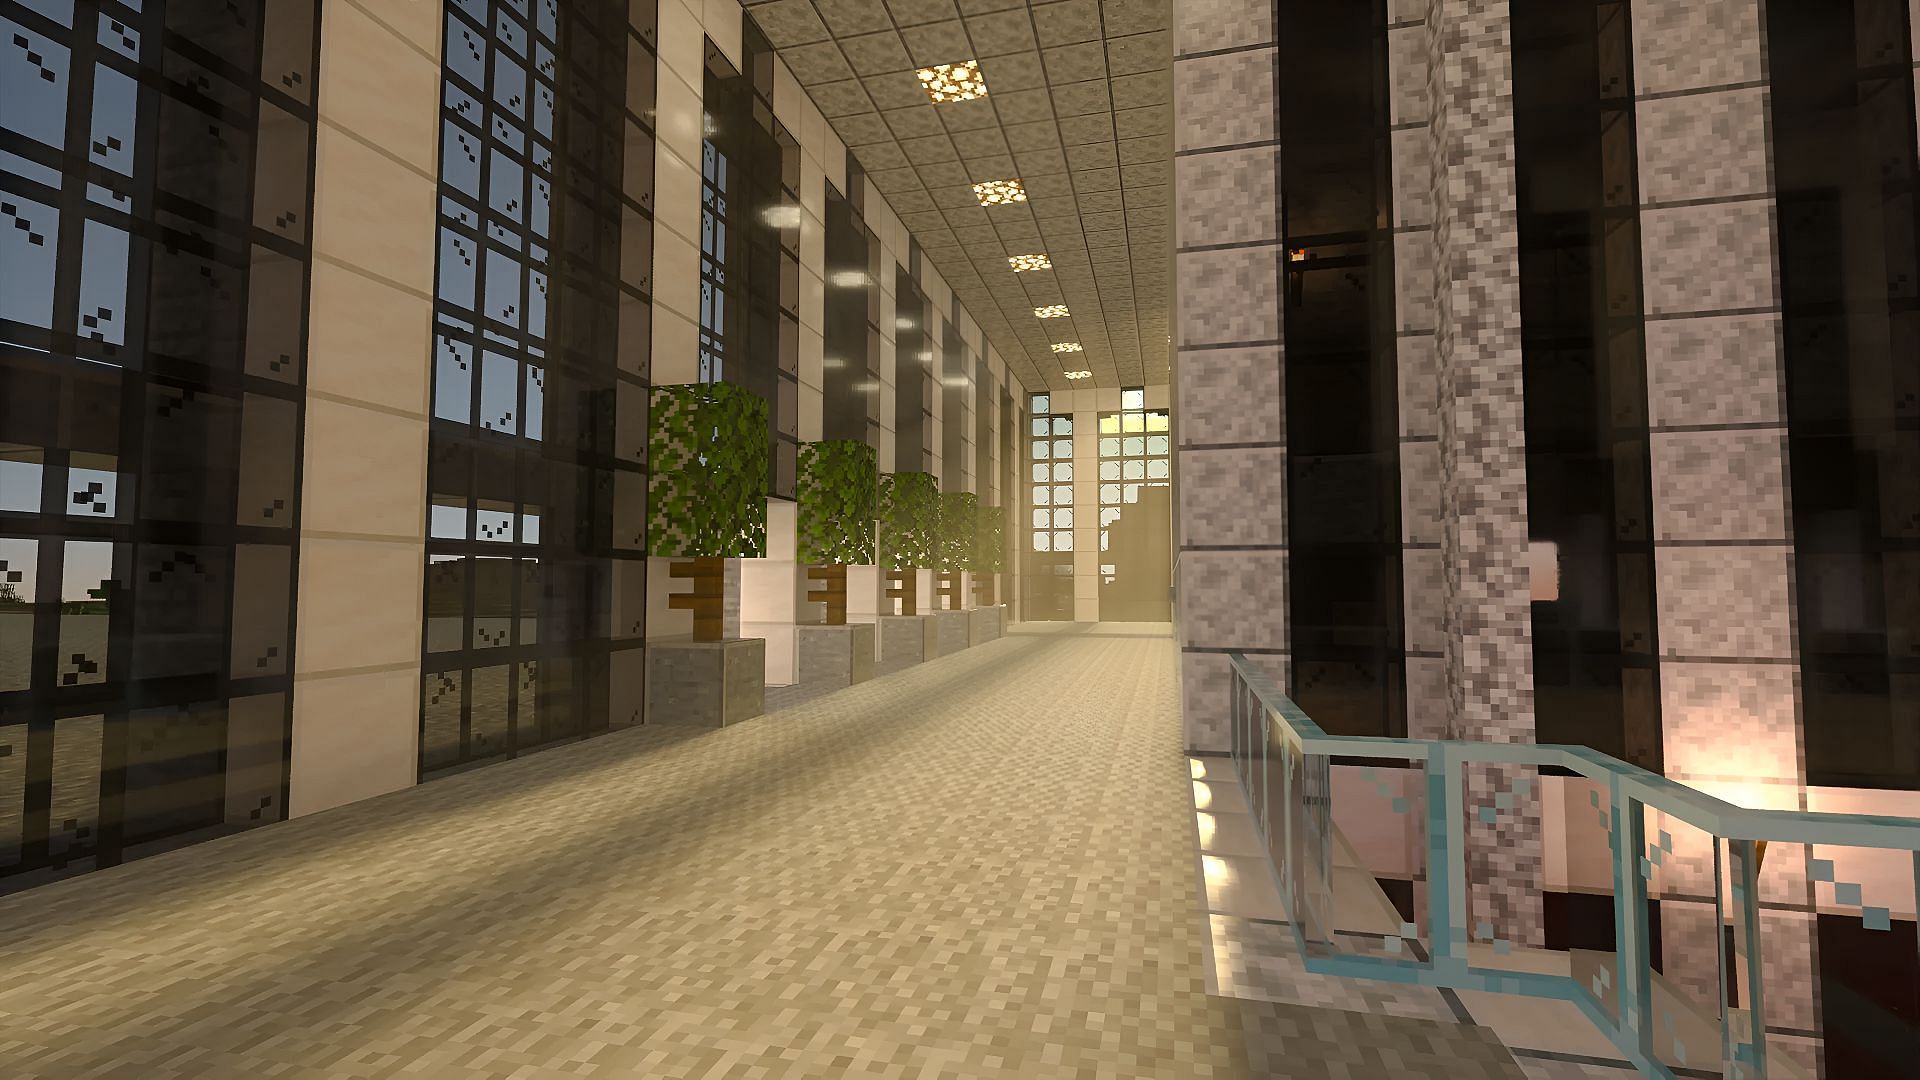 One Minecraft fan recreated the World Trade Center in their Survival Mode server (Image via Flandardly/Reddit)